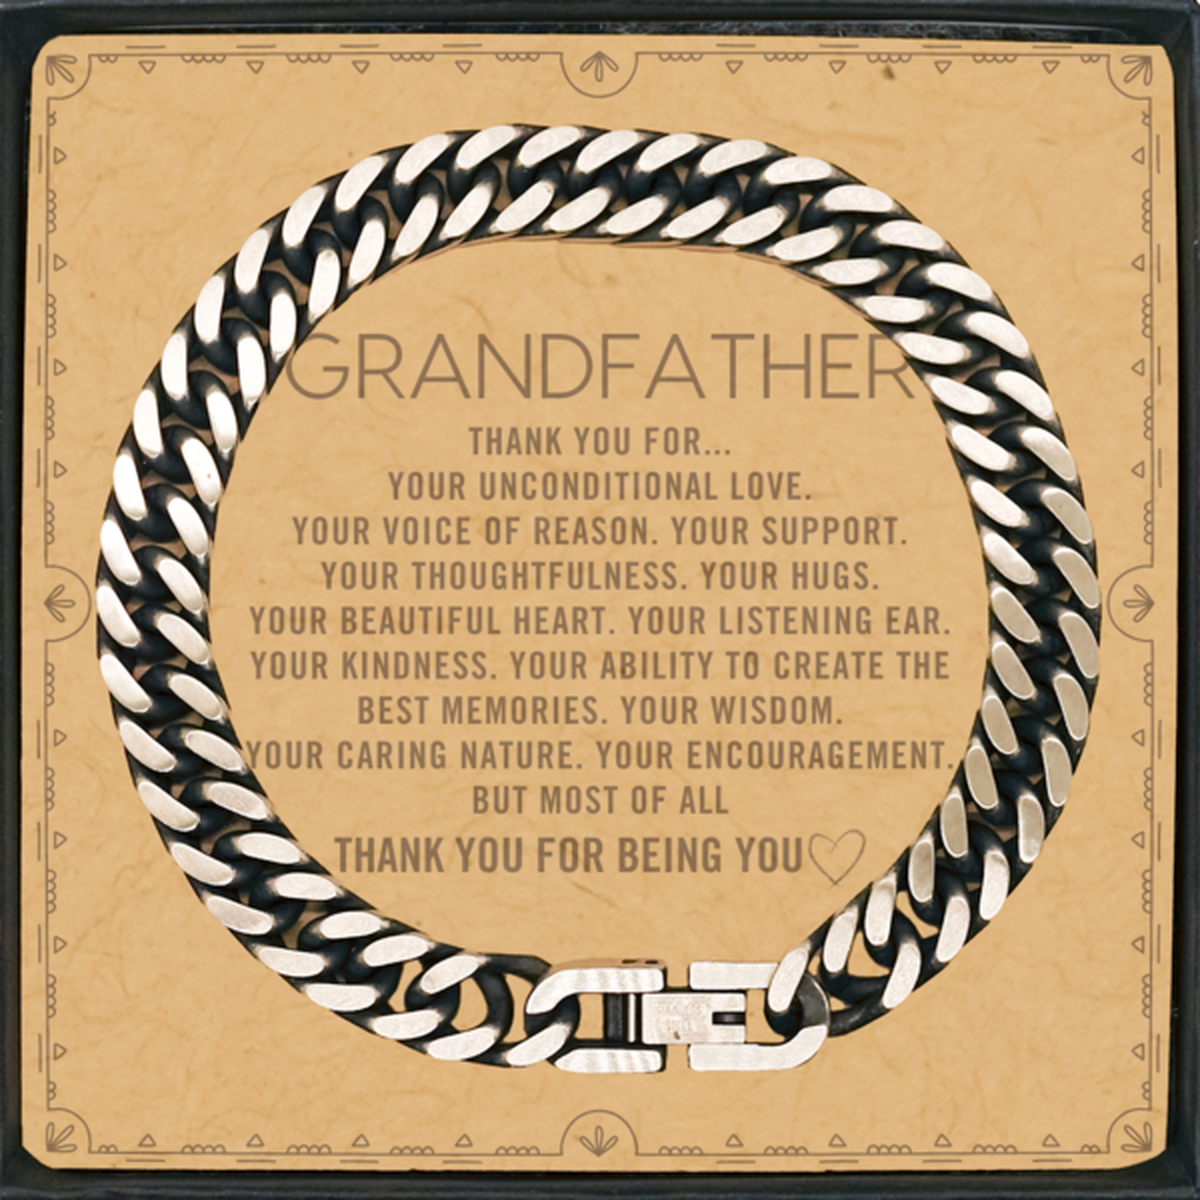 Grandfather Cuban Link Chain Bracelet Custom, Message Card Gifts For Grandfather Christmas Graduation Birthday Gifts for Men Women Grandfather Thank you for Your unconditional love